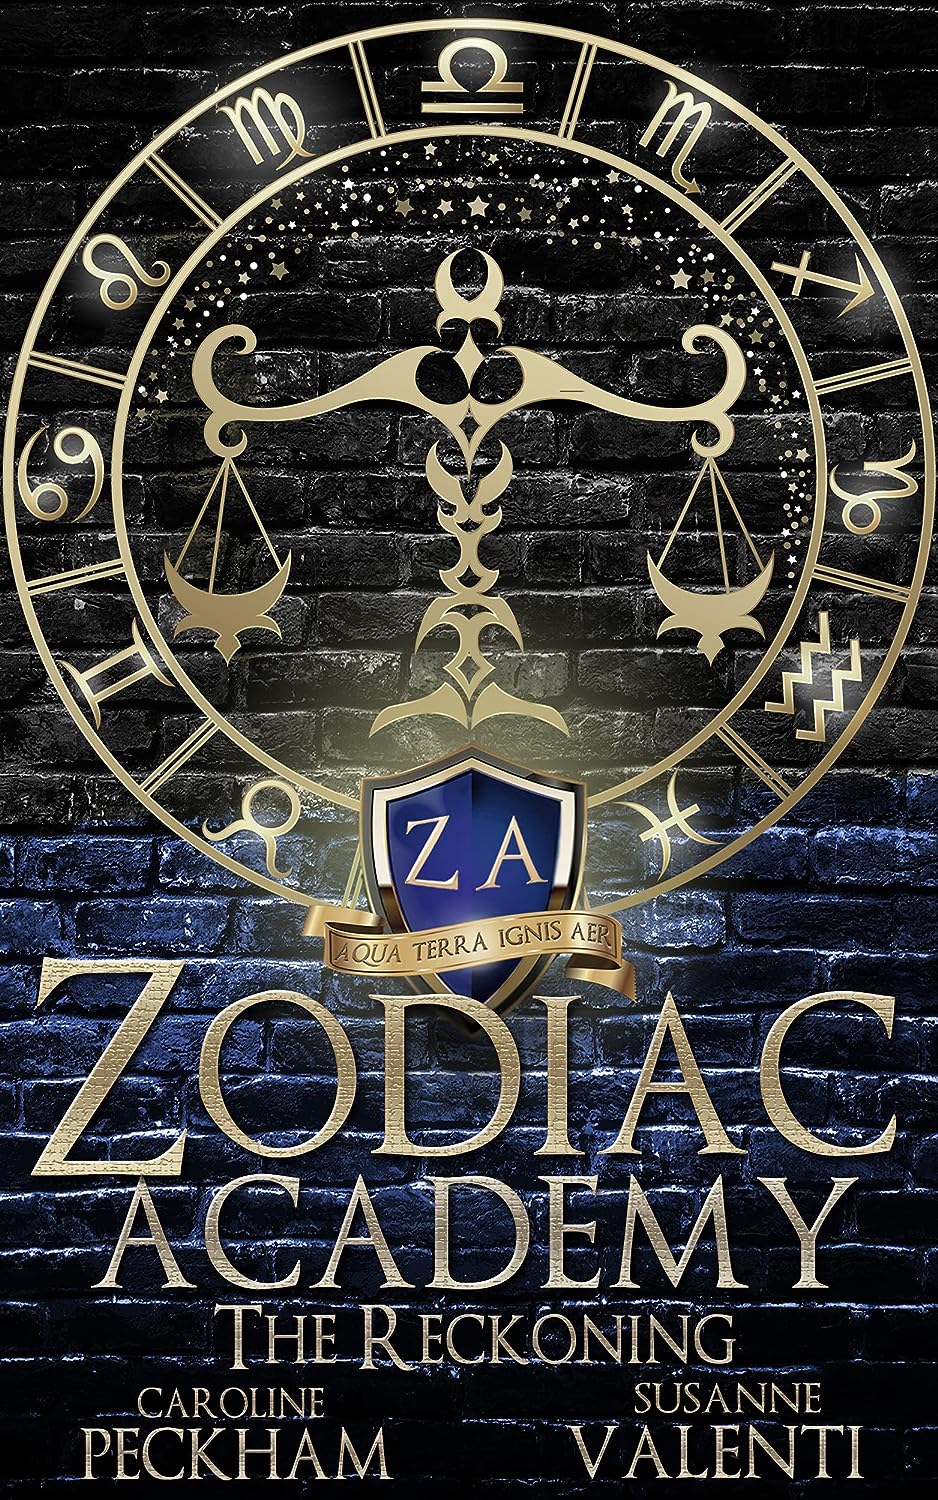 The Reckoning (Zodiac Academy Book 3) by Caoline Peckham and Susanne Valenti